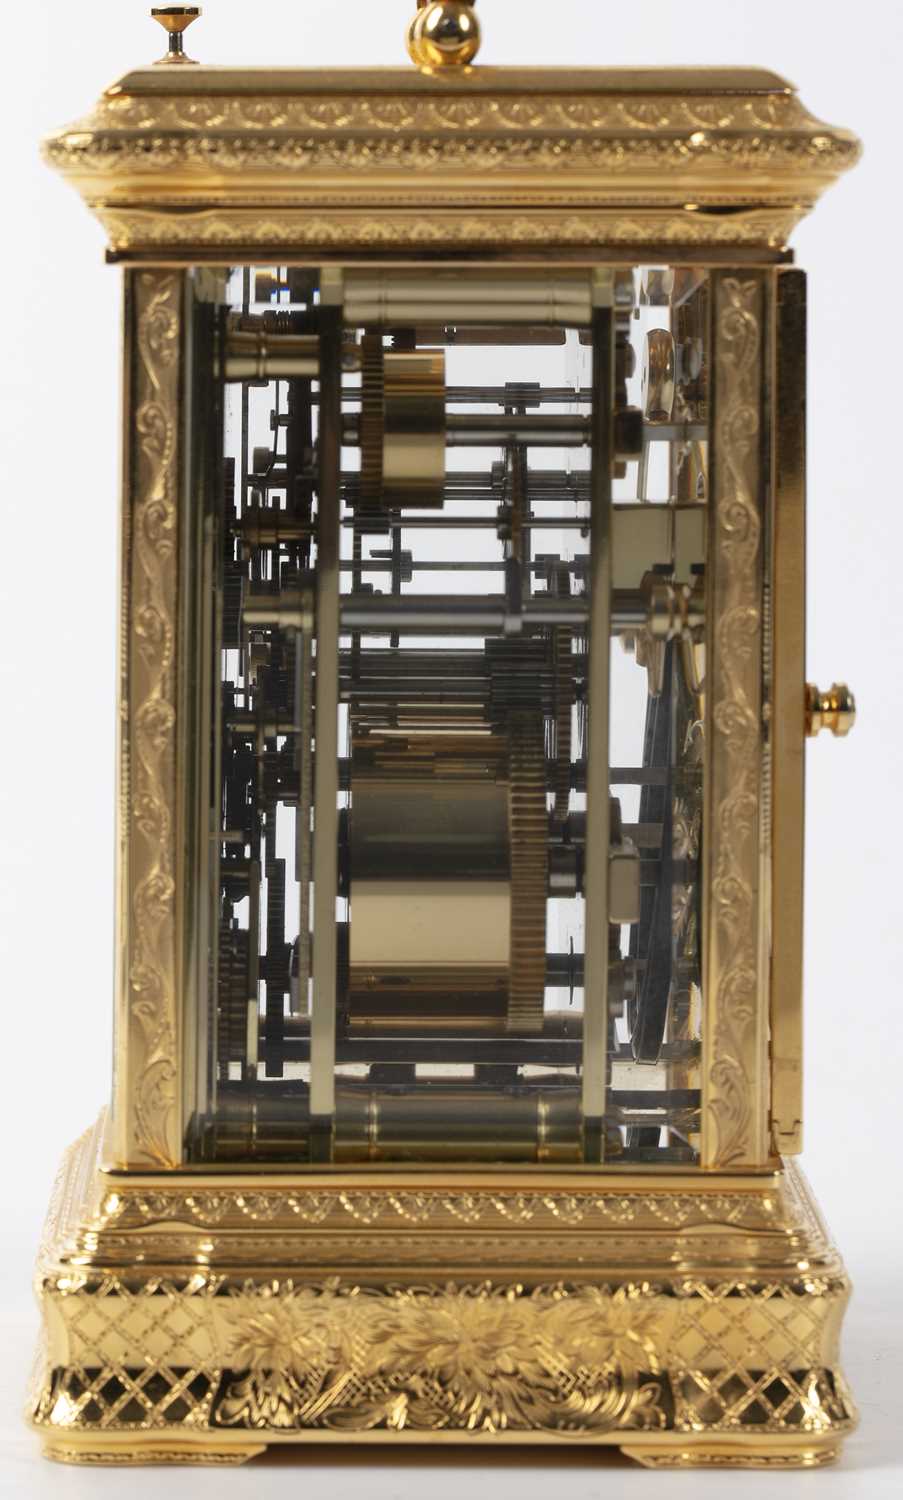 A modern L'epée gilt brass carriage clock retailed by Mappin & Webb with white enamel Roman dial, - Image 5 of 5